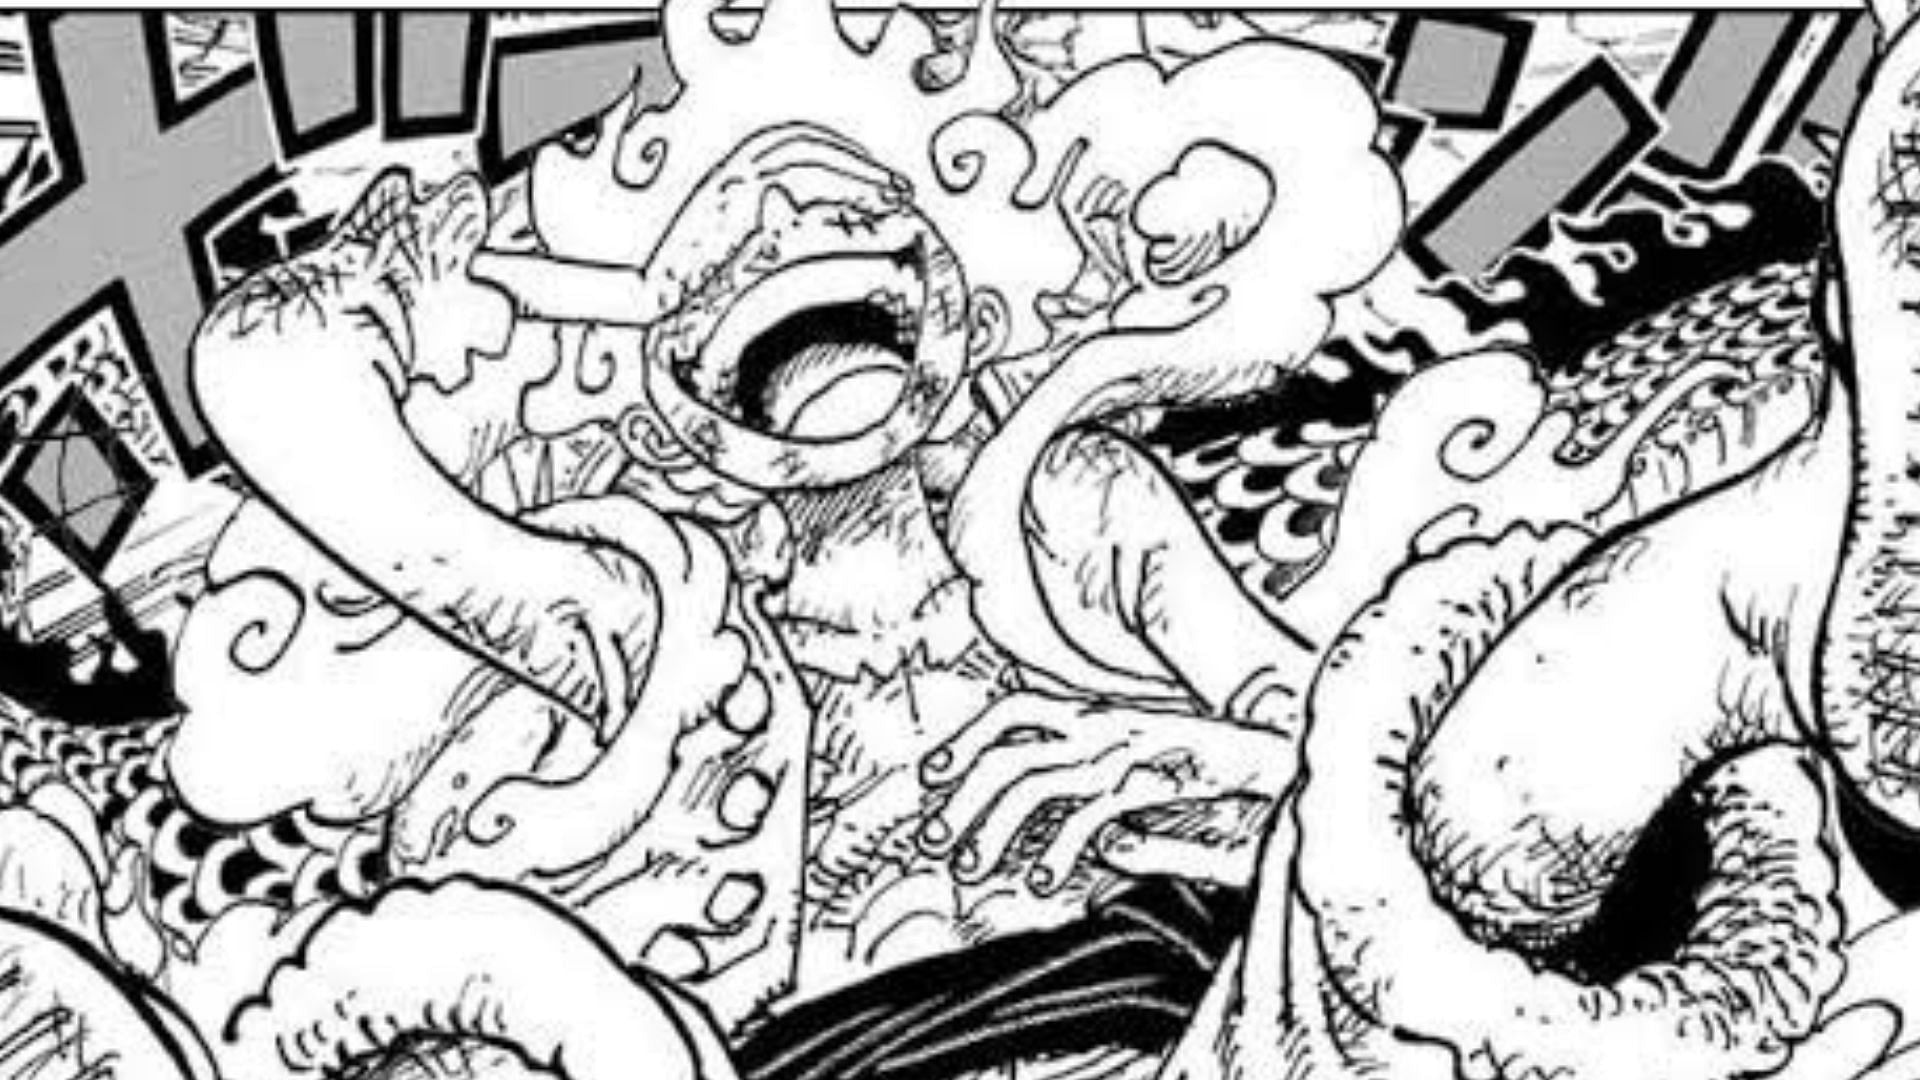 One Piece Chapter 1044: Release Date, Luffy's Truth